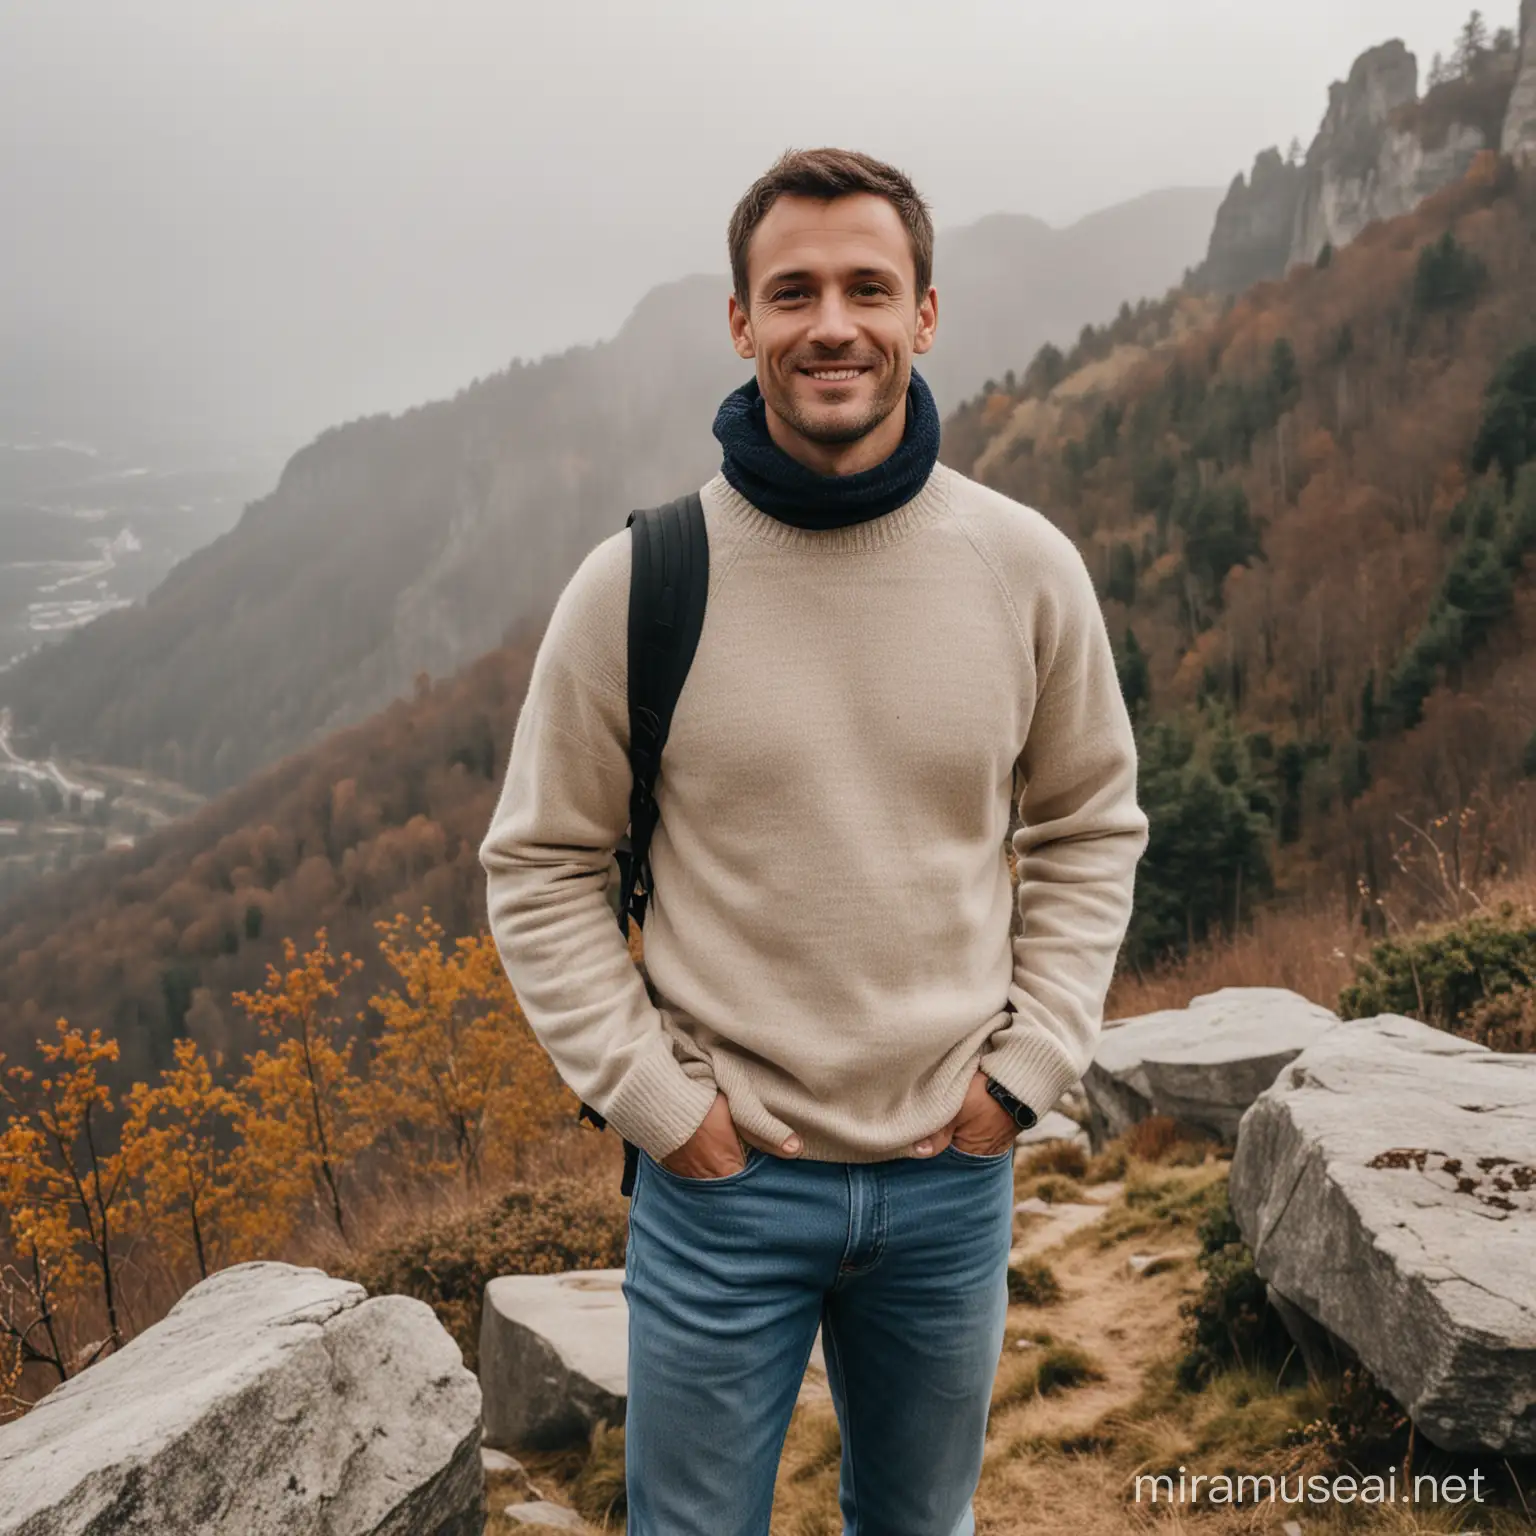 Smiling Man in Sweater and Jeans Poses on Mountain Cliff Overlooking Forest